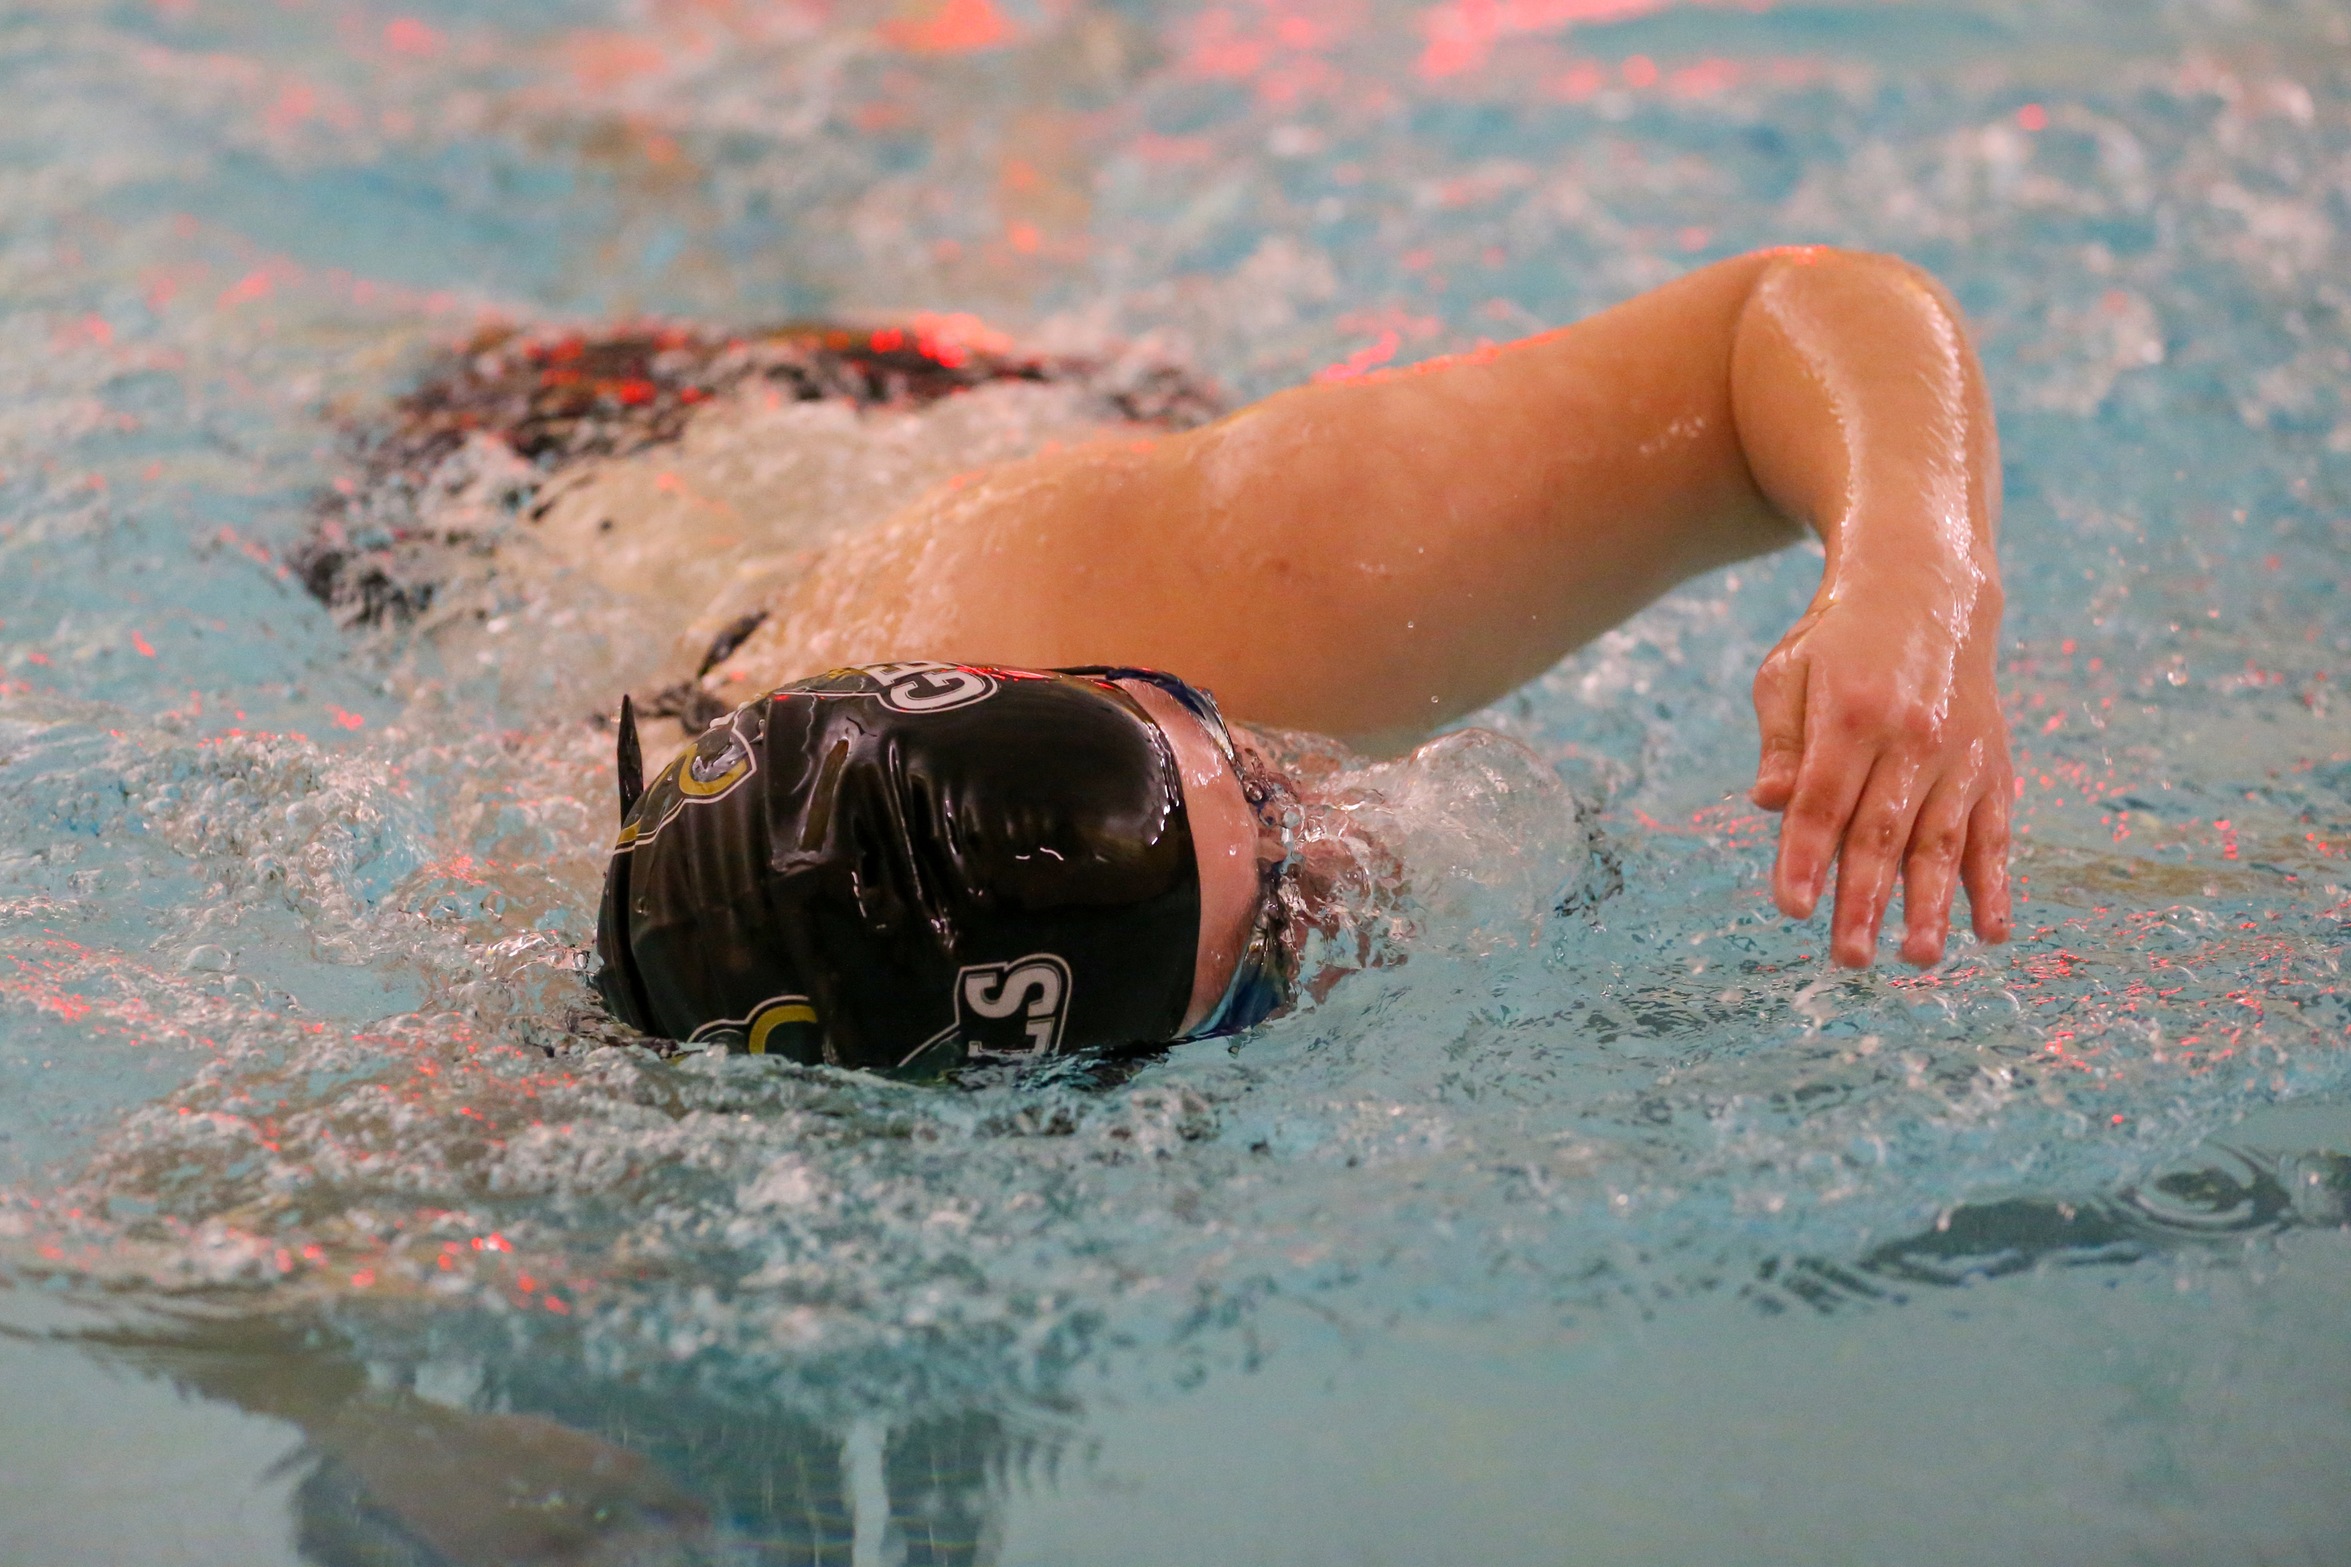 Campagna Swam Personal Records in Several Events over the Championship Weekend